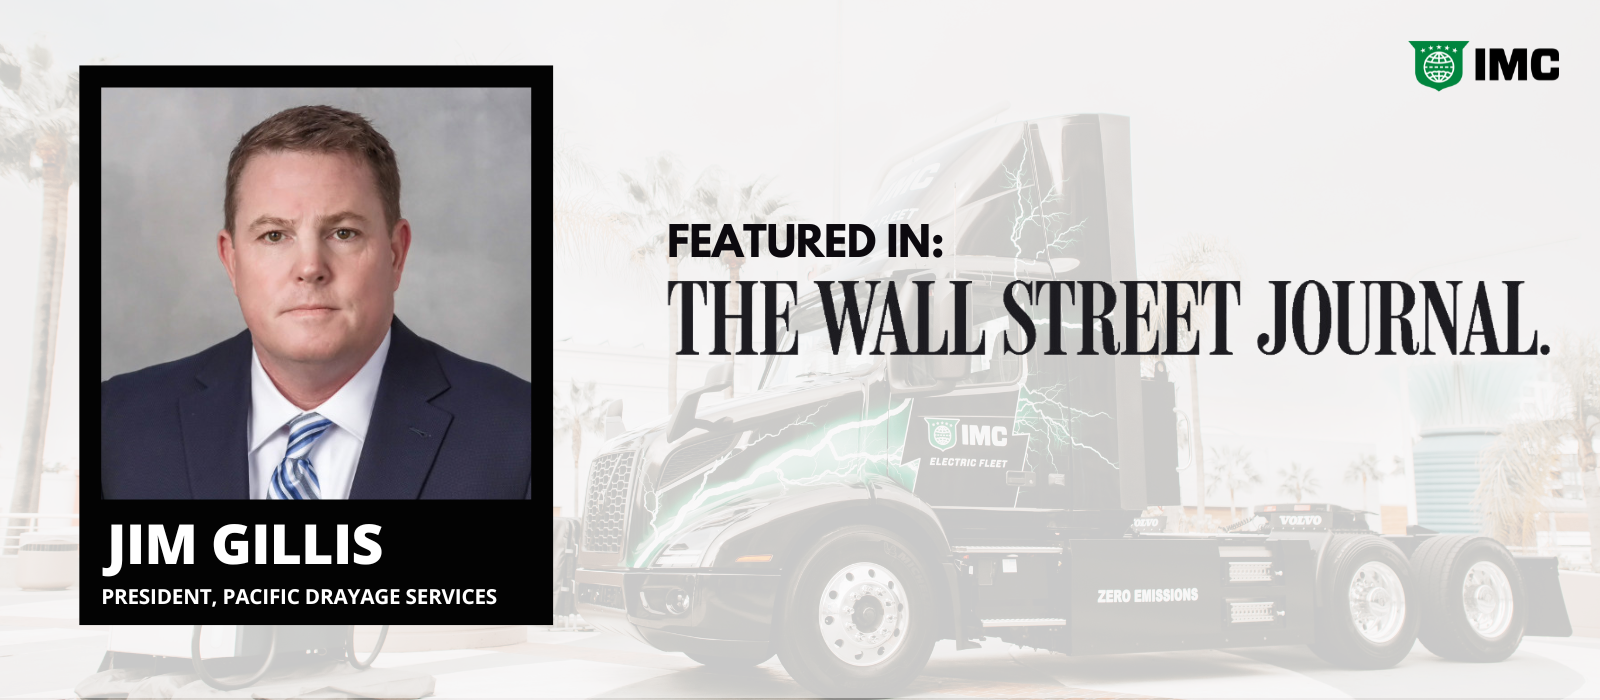 Insights from the Leader in Electric Truck Initiatives